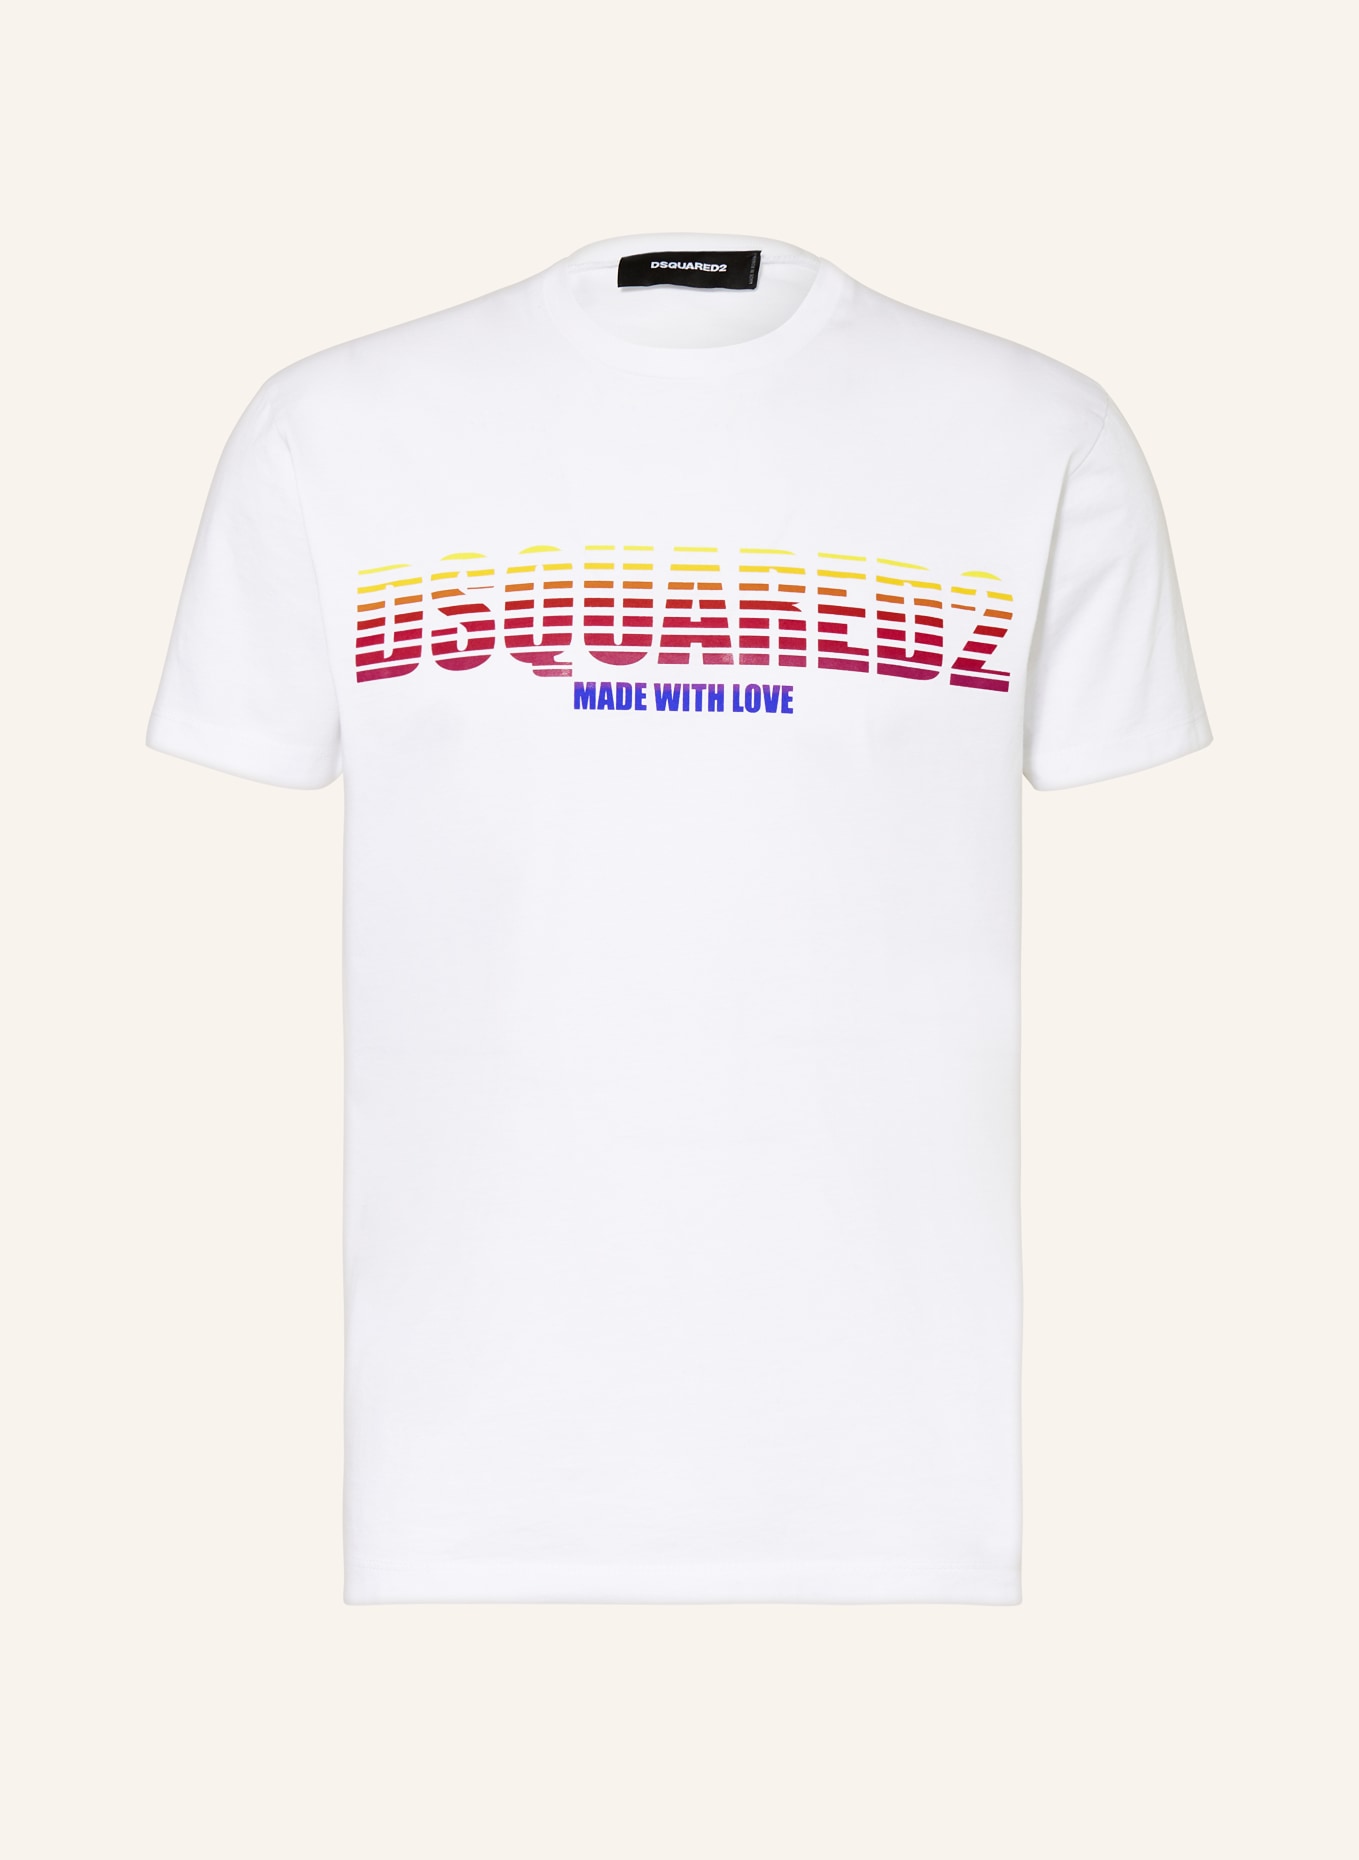 DSQUARED2 T-Shirt COOL FIT DS2 MADE WITH LOVE, Farbe: WEISS (Bild 1)